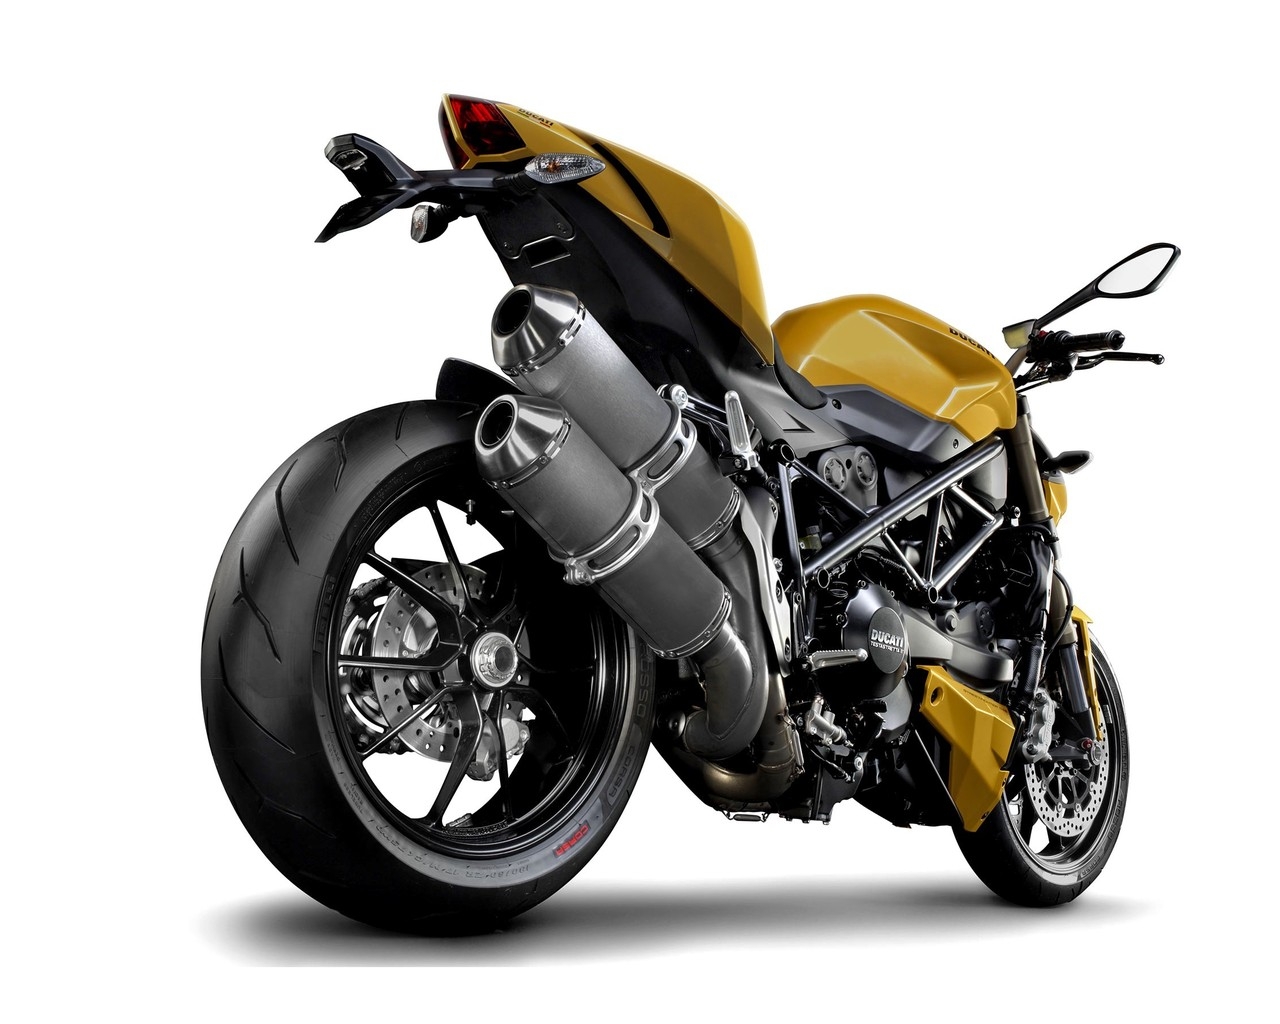  Ducati Streetfighter Rear for 1280 x 1024 resolution